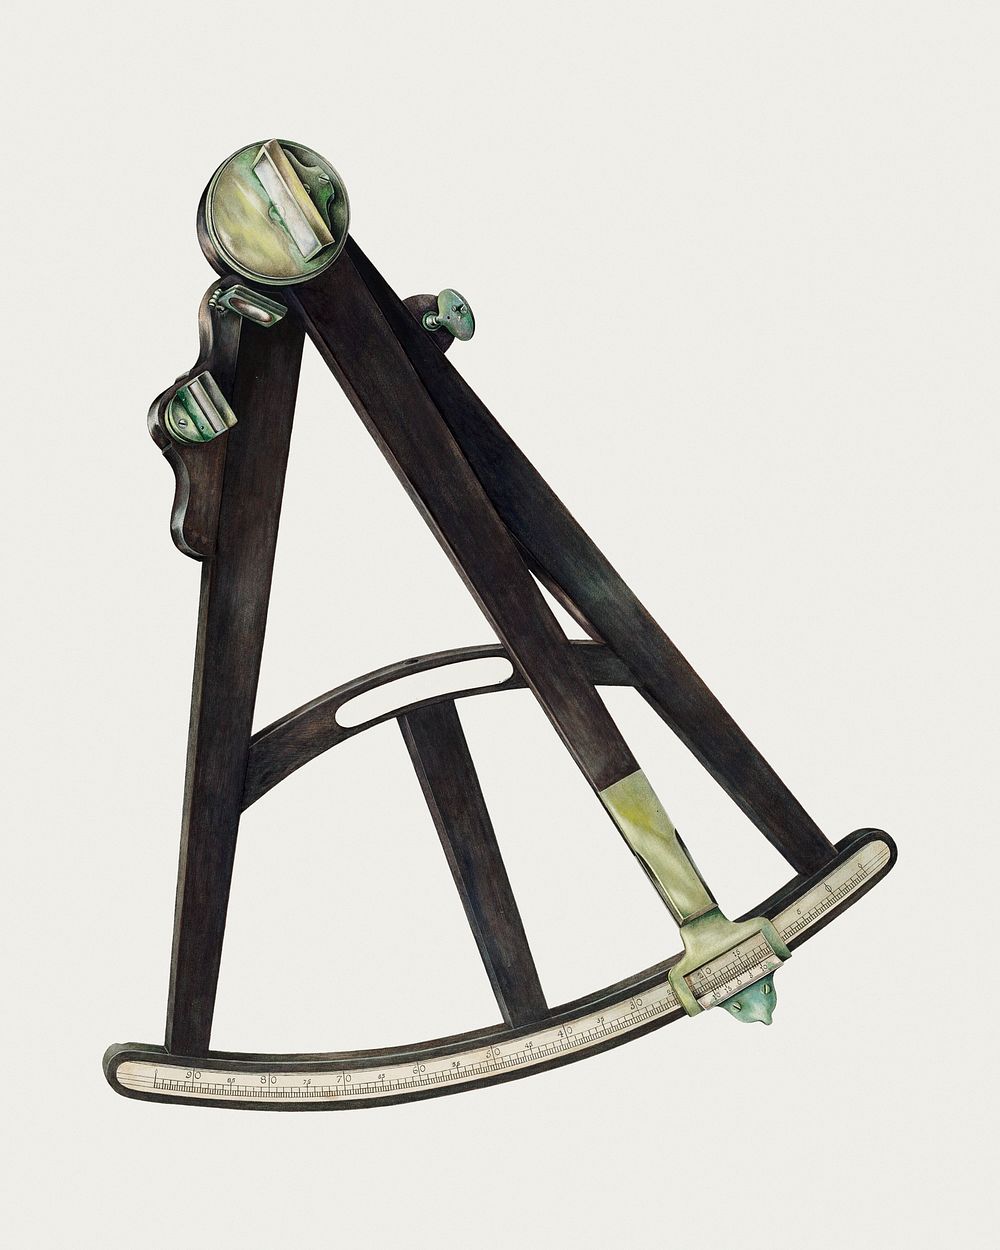 Vintage octant psd illustration, remixed from the artwork by John Thorsen